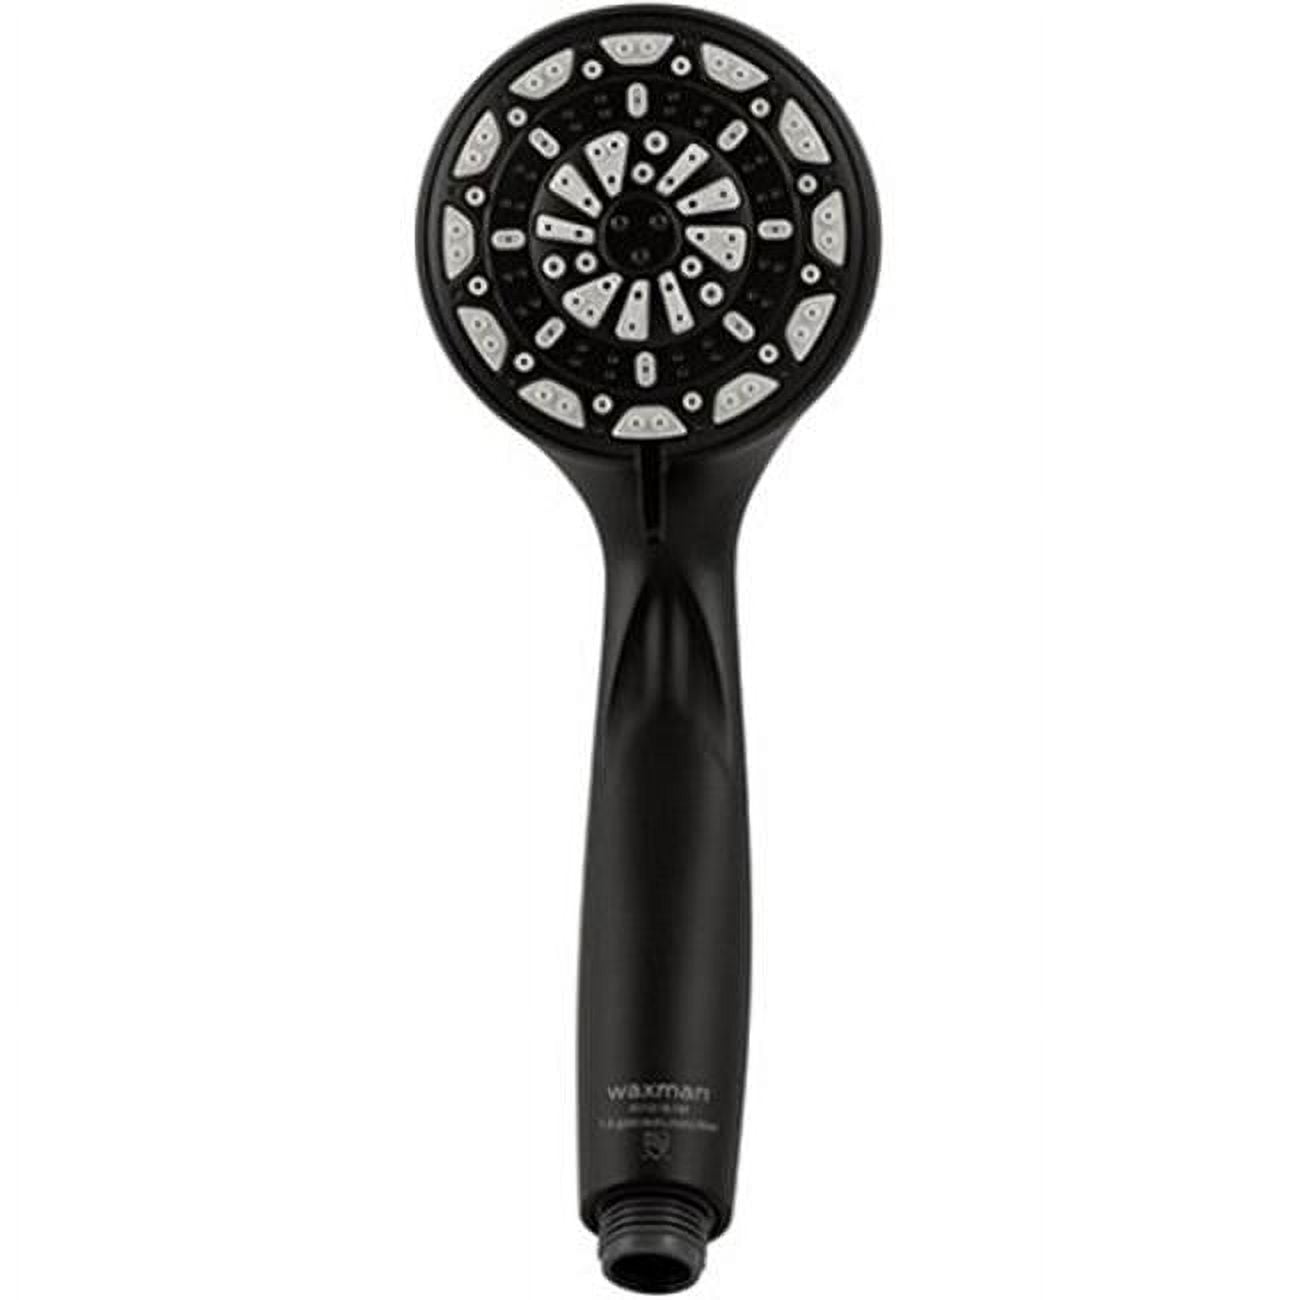 Picture of Waxman Consumer Products 8364013 6 Position Handheld Shower Head, Matte Black